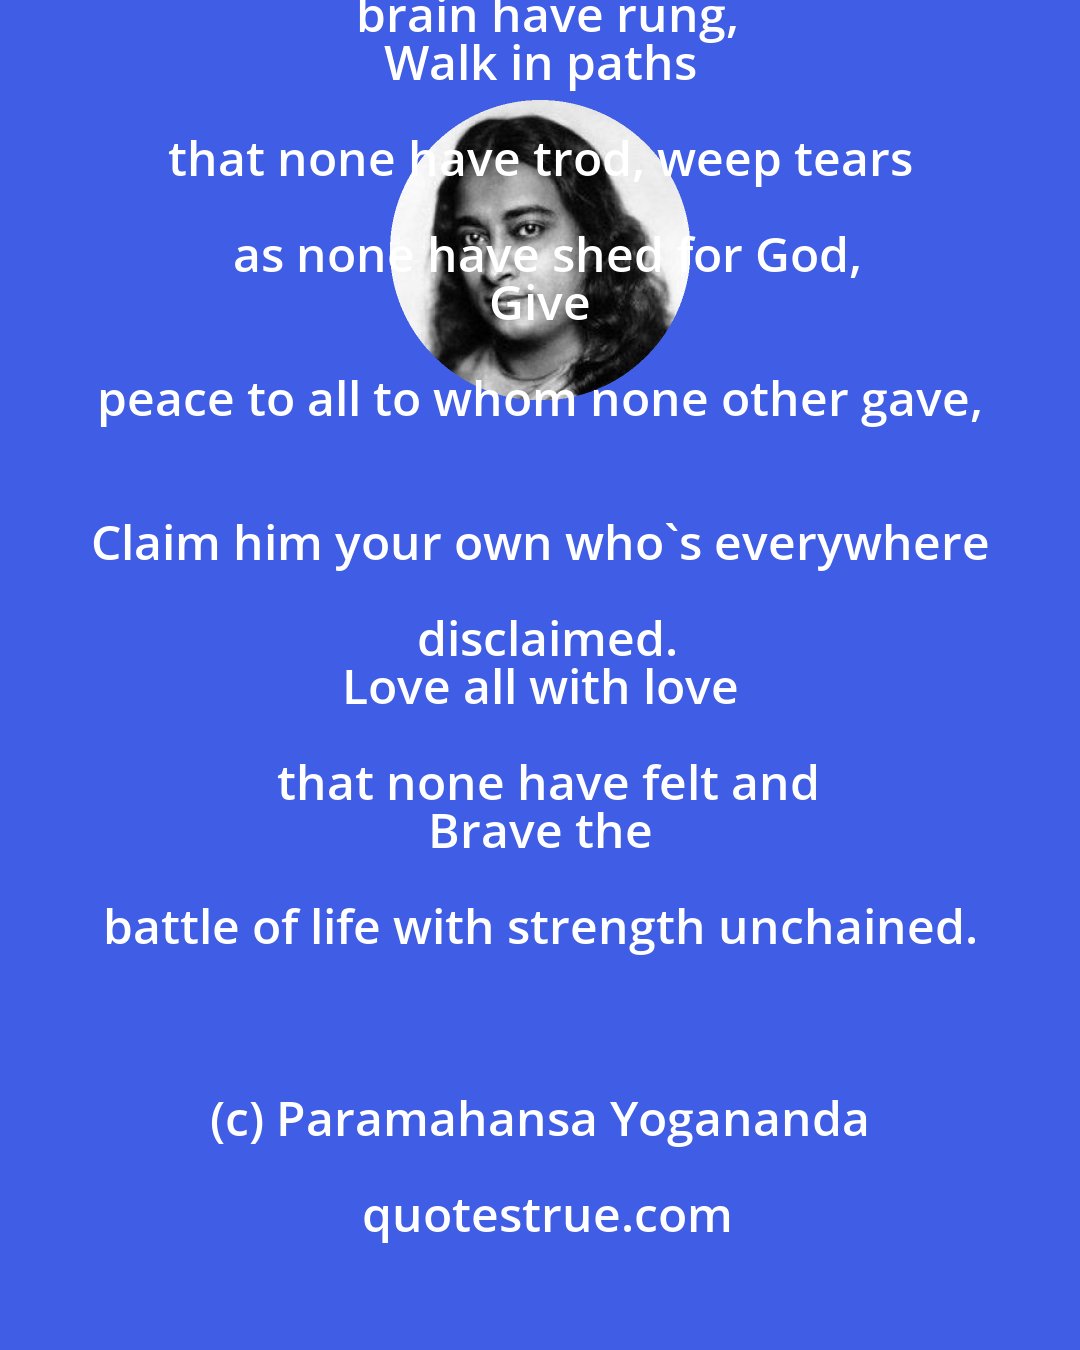 Paramahansa Yogananda: Sing songs that none have sung, think thoughts that ne'er in the brain have rung,
 Walk in paths that none have trod, weep tears as none have shed for God,
 Give peace to all to whom none other gave, 
 Claim him your own who's everywhere disclaimed.
 Love all with love that none have felt and
 Brave the battle of life with strength unchained.